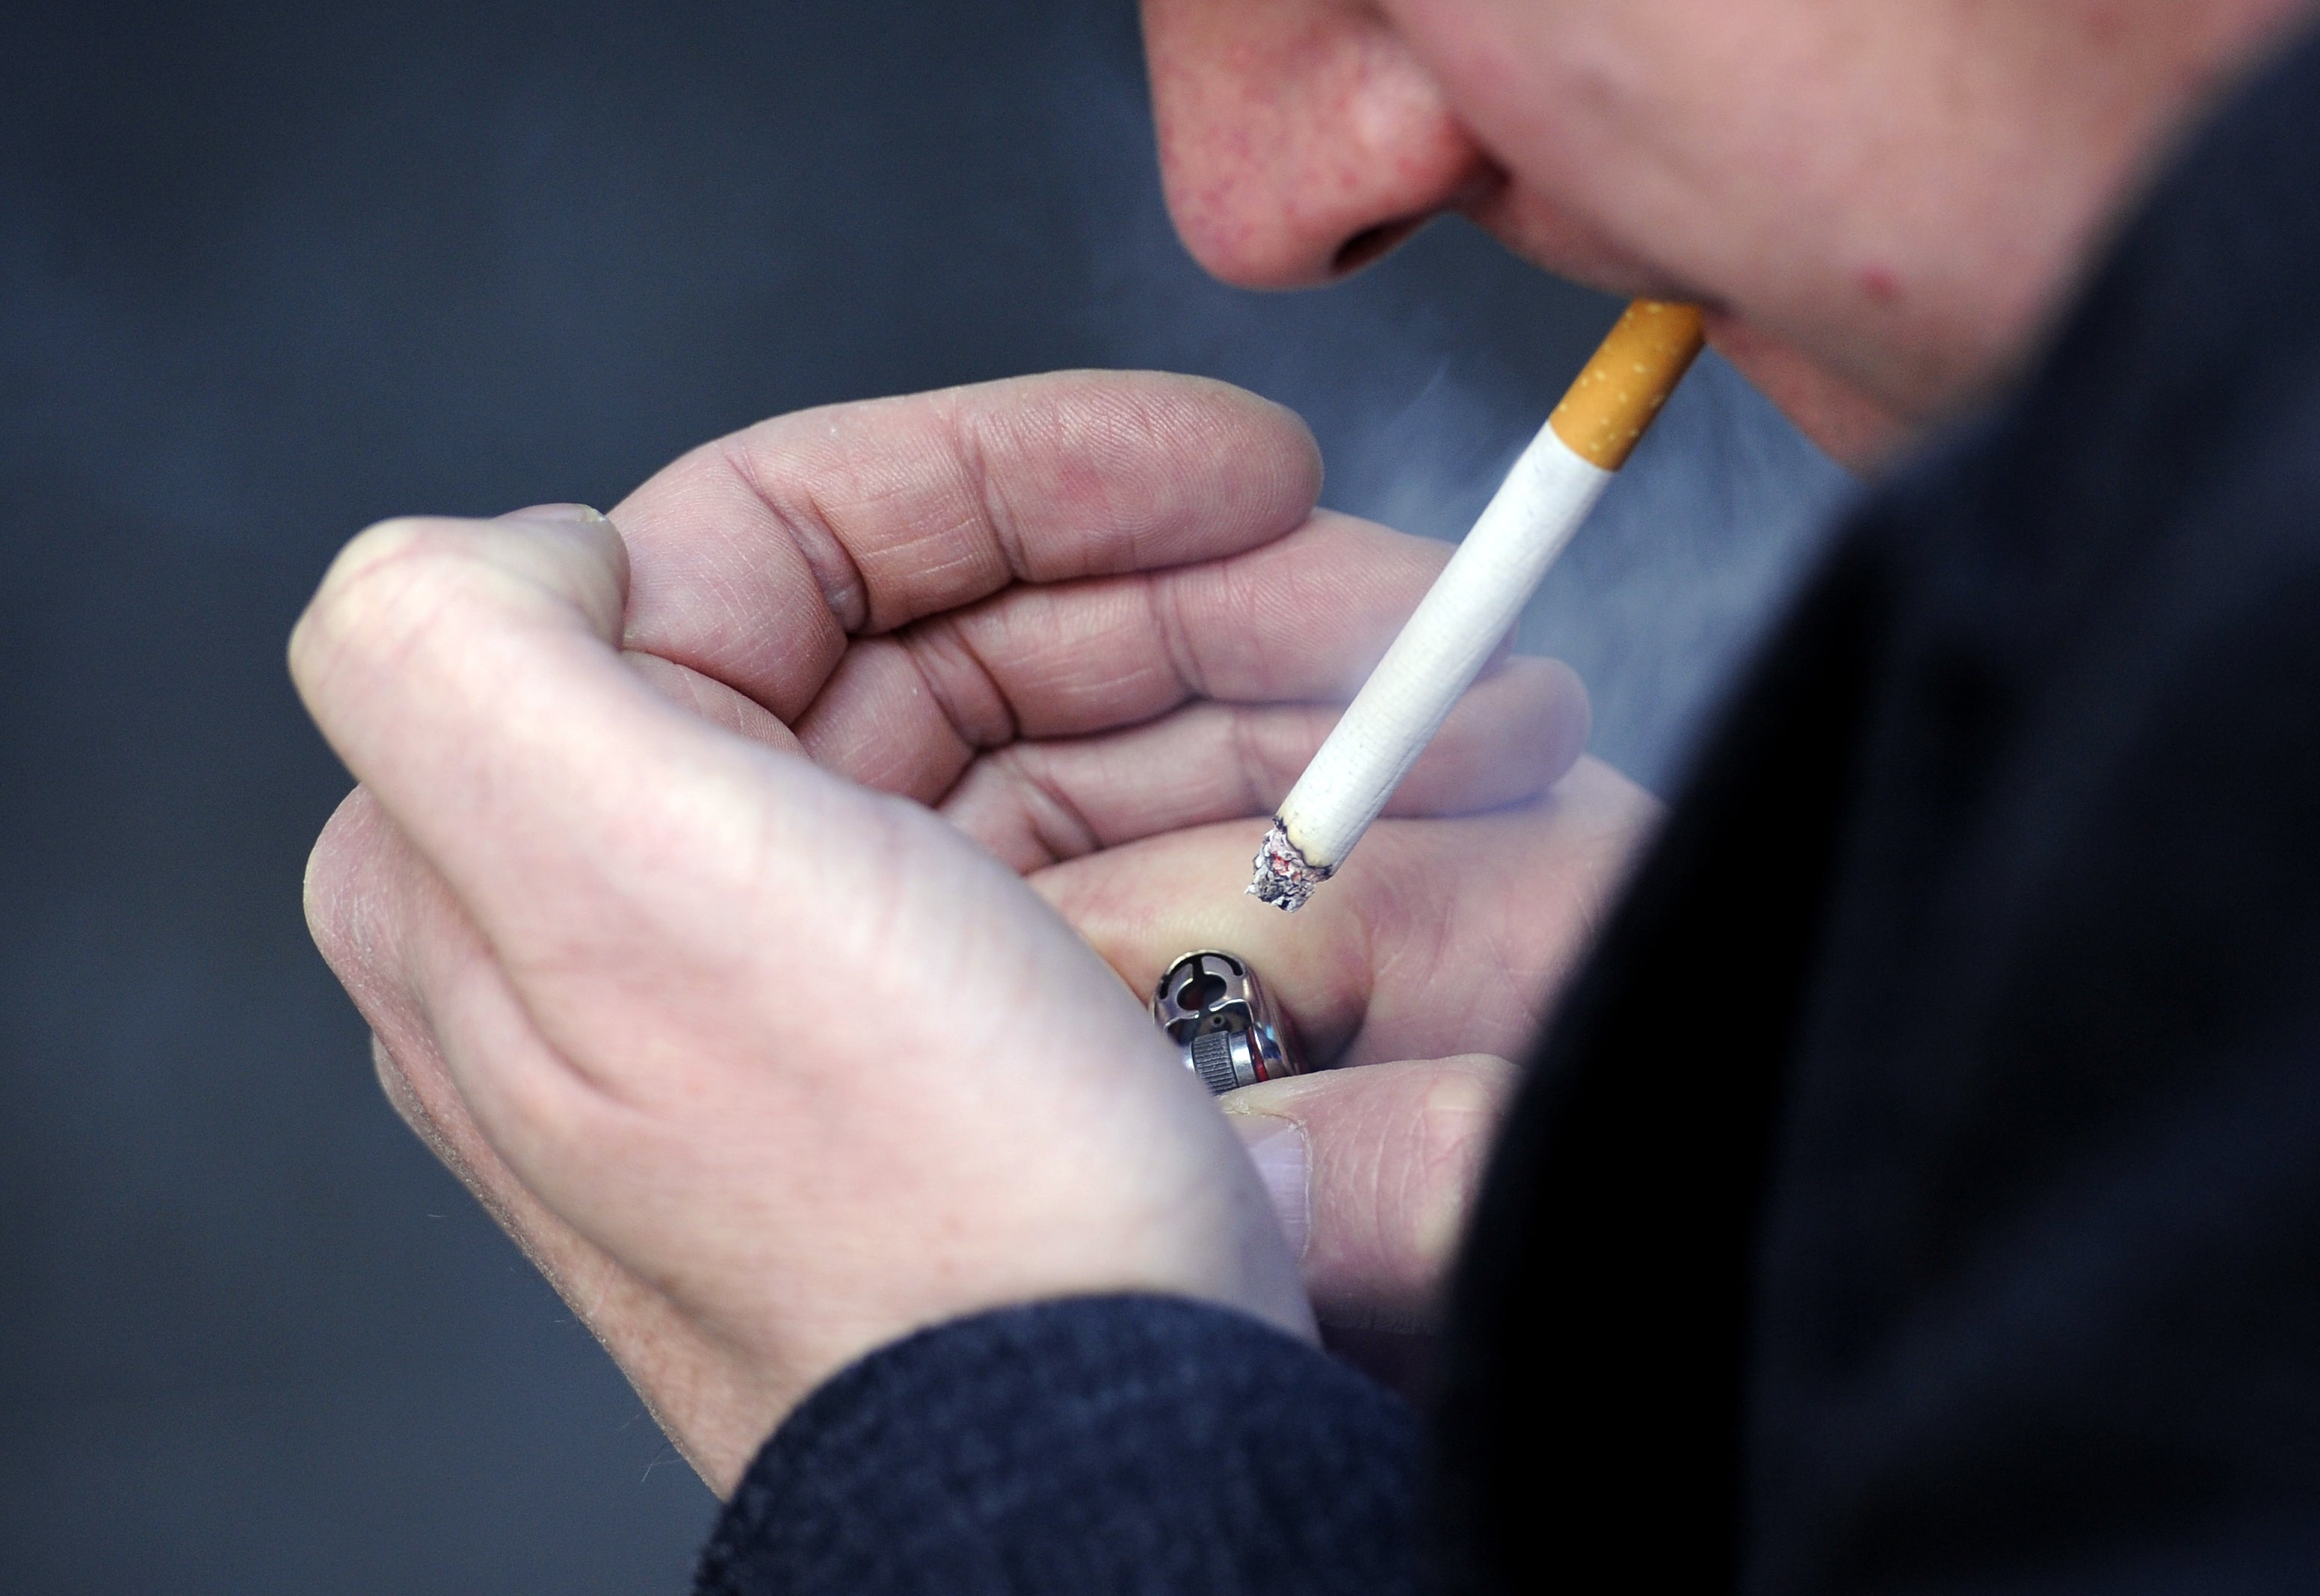 Reports suggest a review into smoking could suggest raising the legal smoking age to 21 (PA)